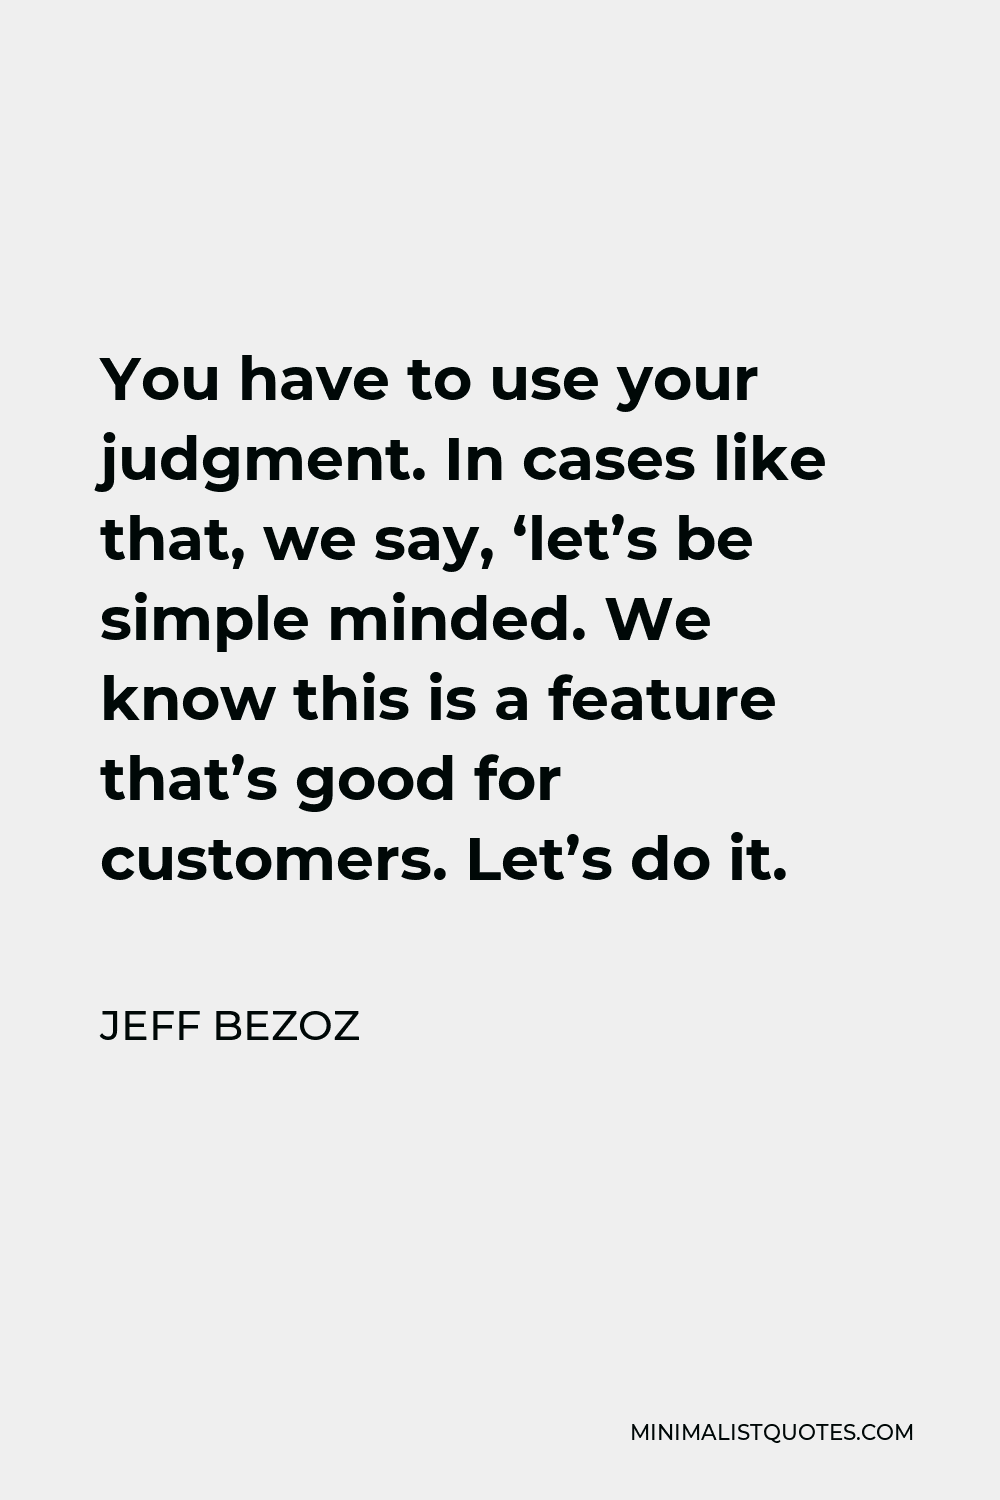 Jeff Bezoz Quote - You have to use your judgment. In cases like that, we say, ‘let’s be simple minded. We know this is a feature that’s good for customers. Let’s do it.